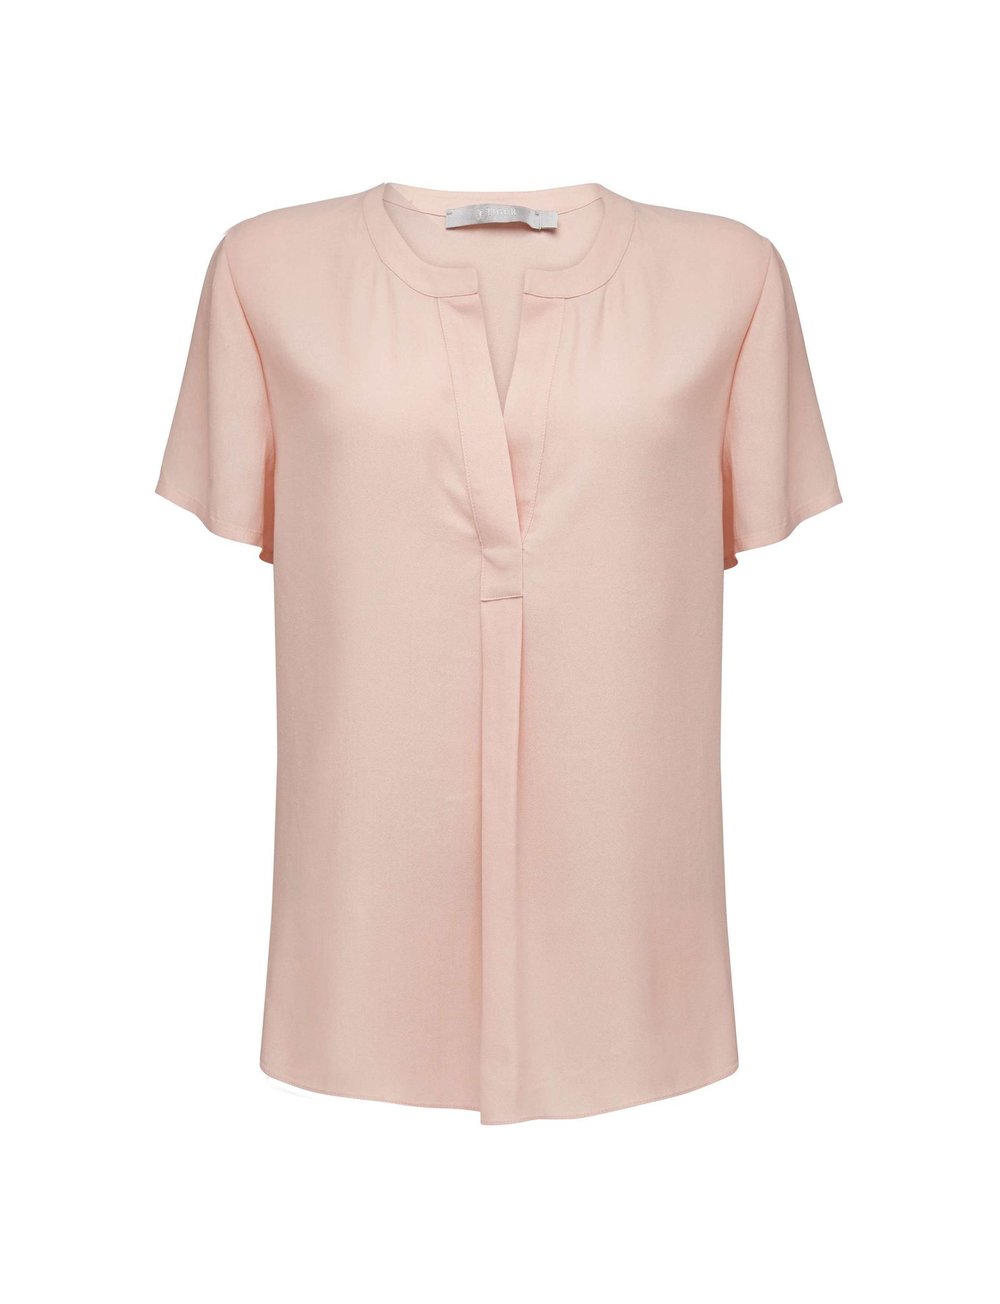 Tiger of Sweden Dulce Top in Blush Pink — UFO No More